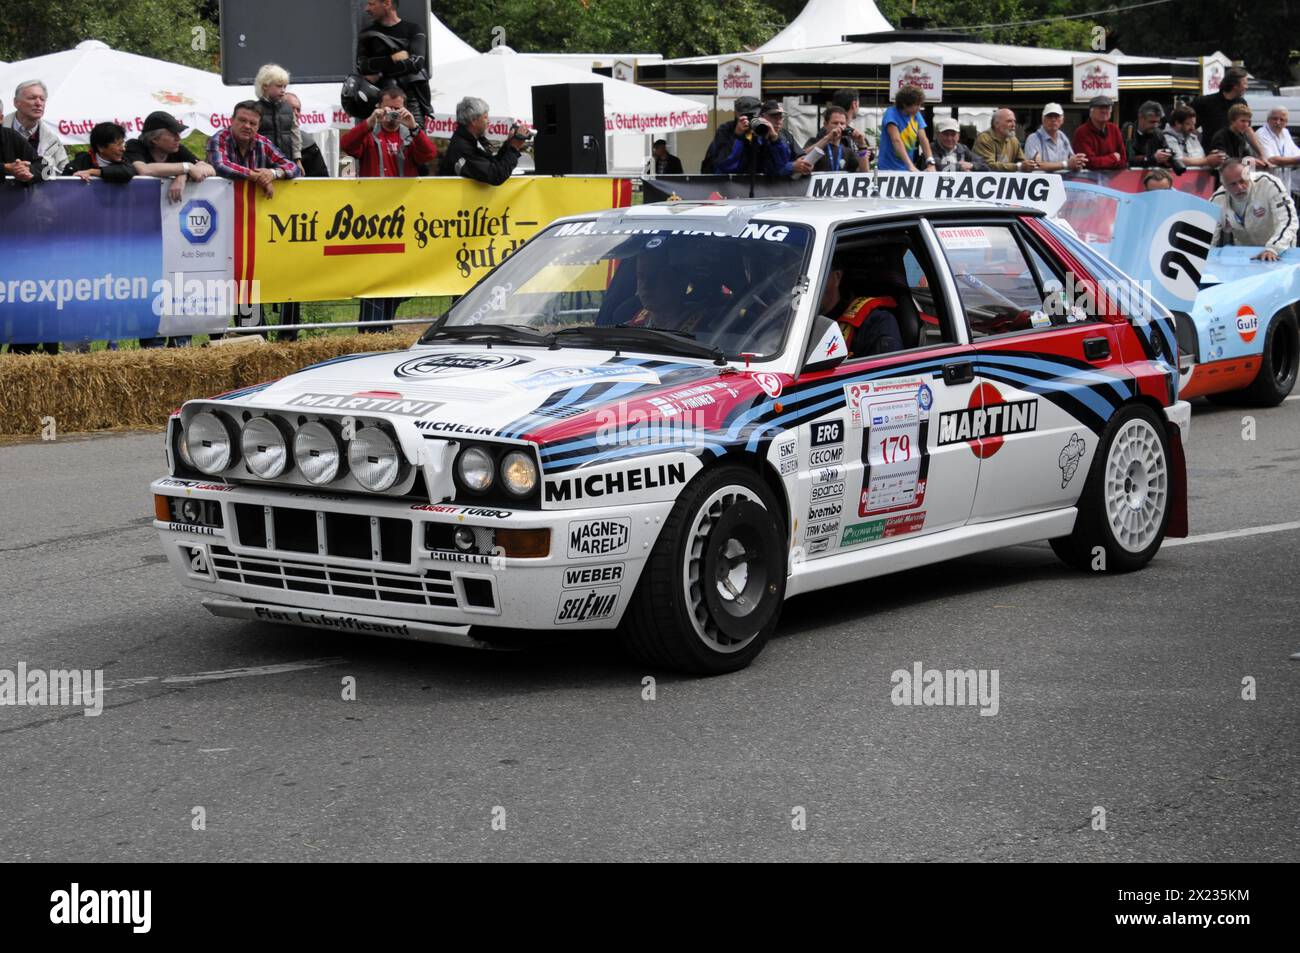 A Lancia rally car with Martini Racing stickers drives past spectators on a road, SOLITUDE REVIVAL 2011, Stuttgart, Baden-Wuerttemberg, Germany Stock Photo